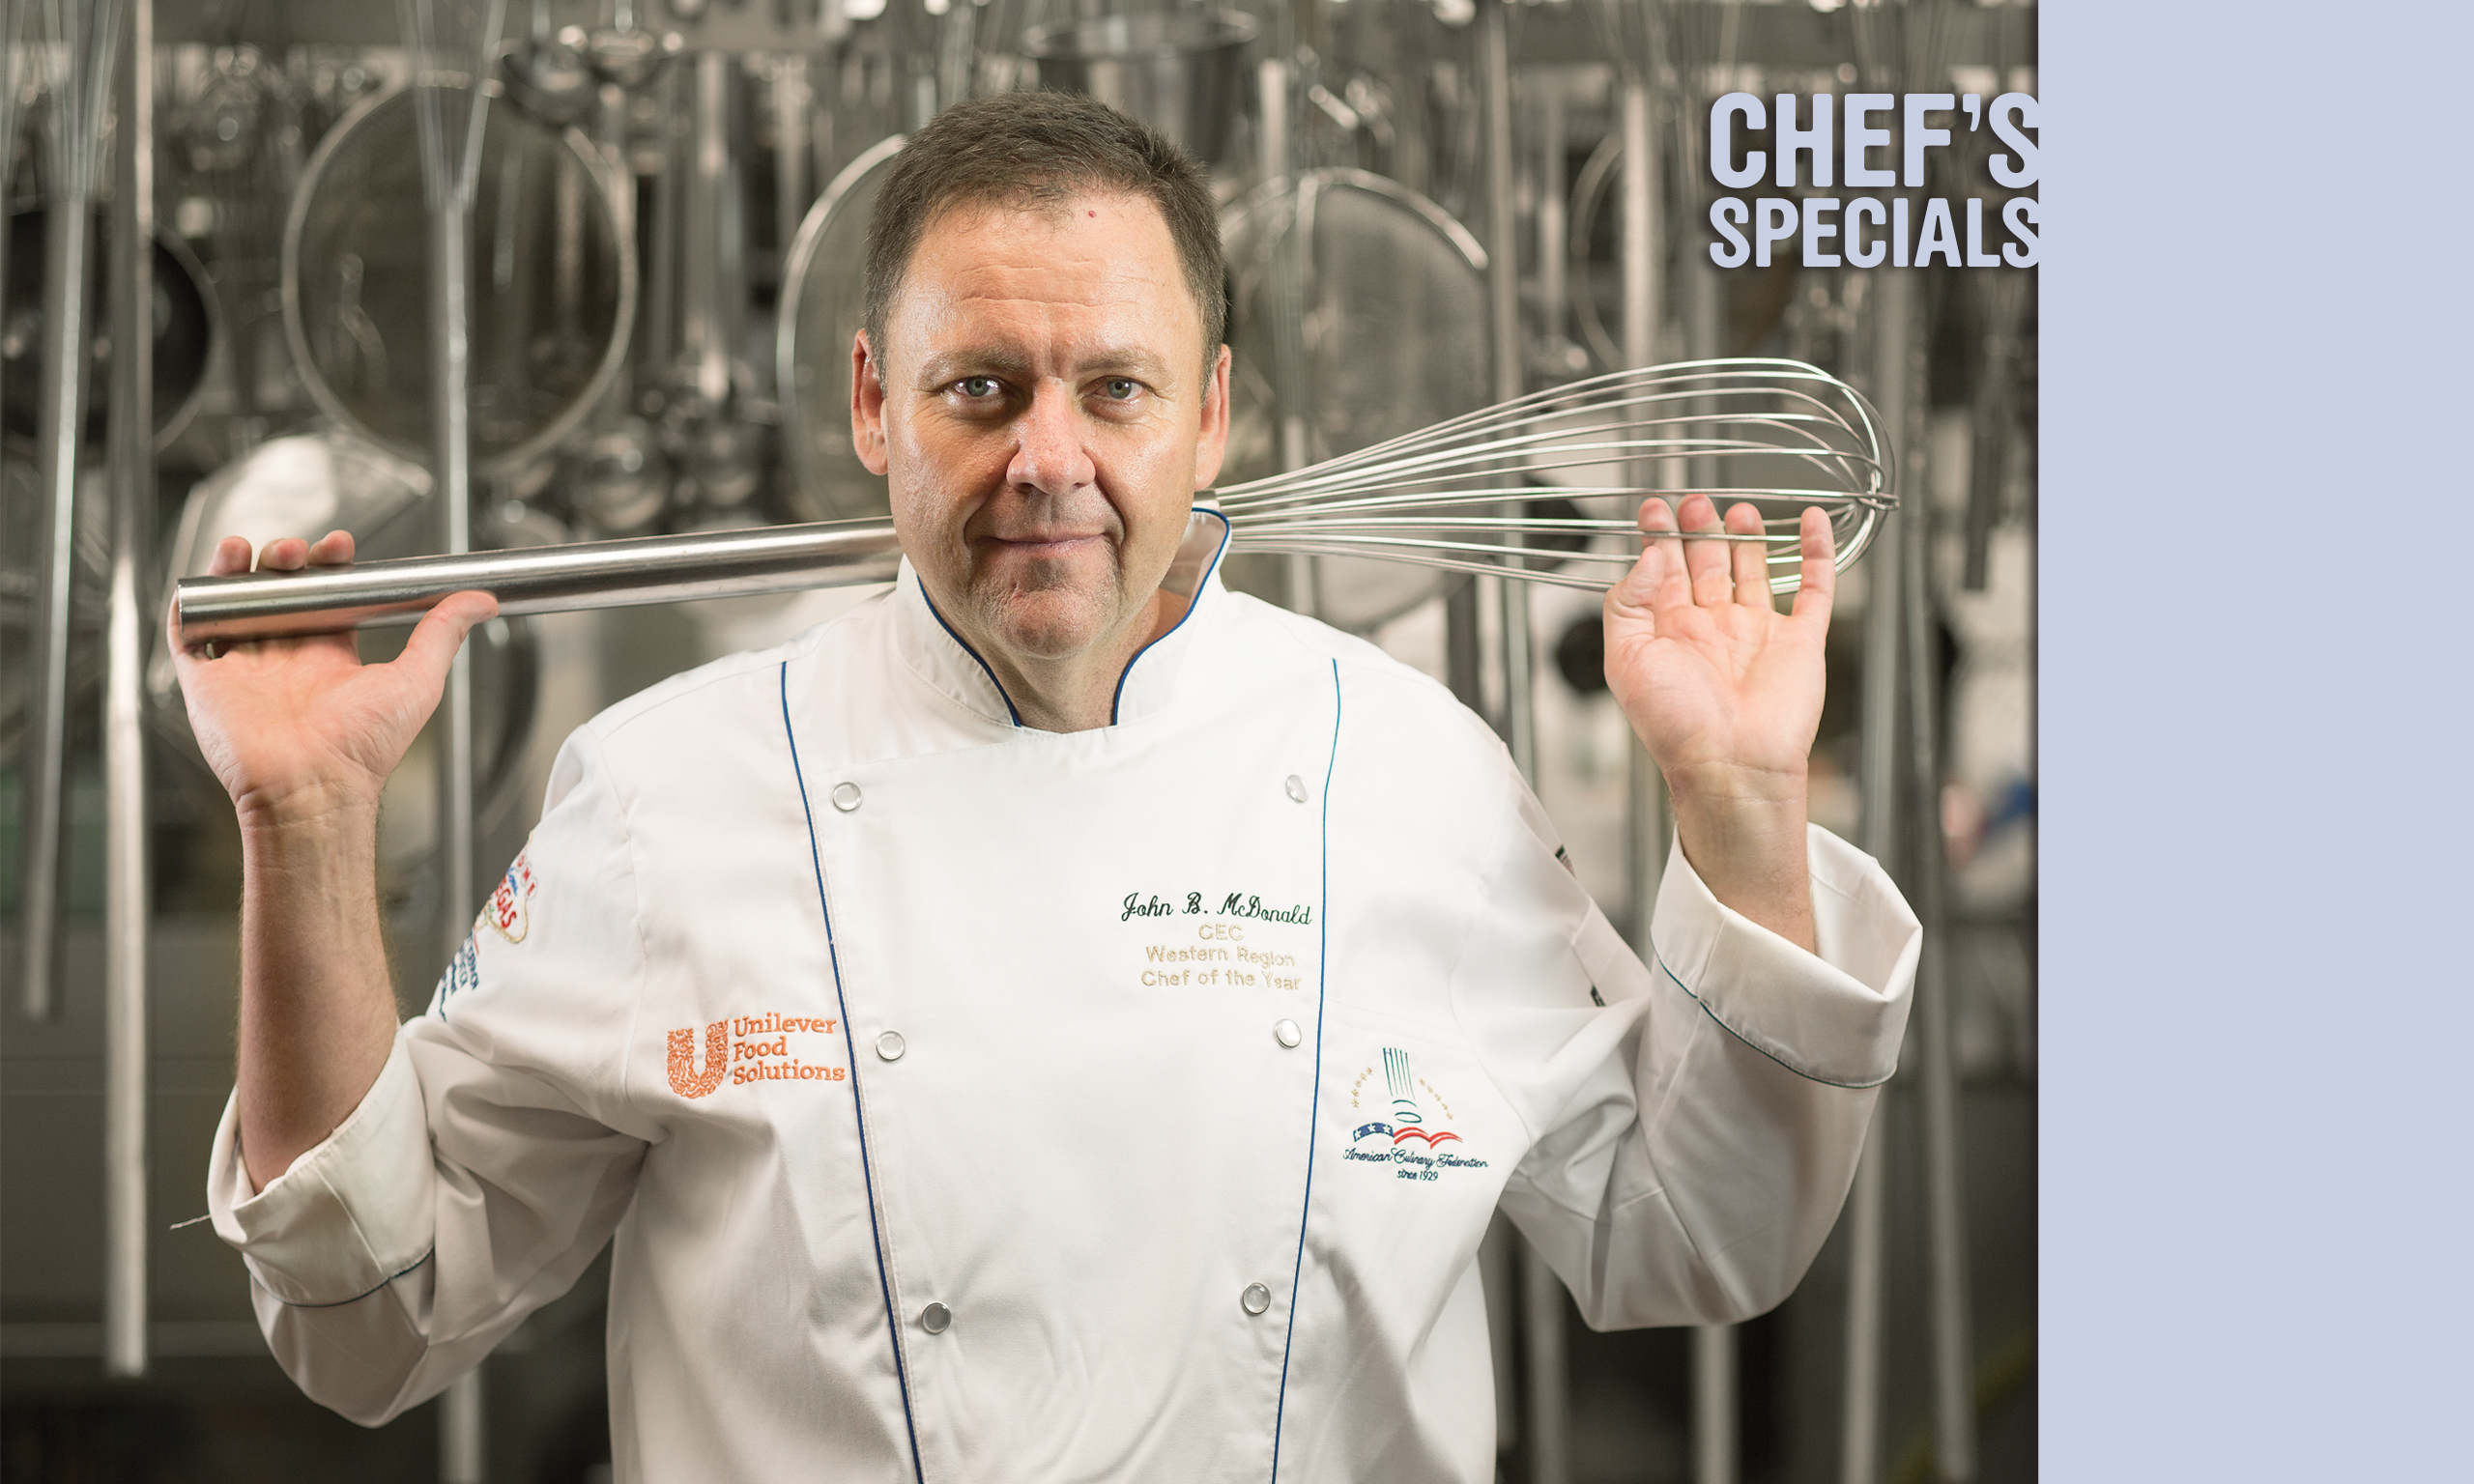 Photo of John McDonald holding a giant whisk, with the title "Chef's Specials"